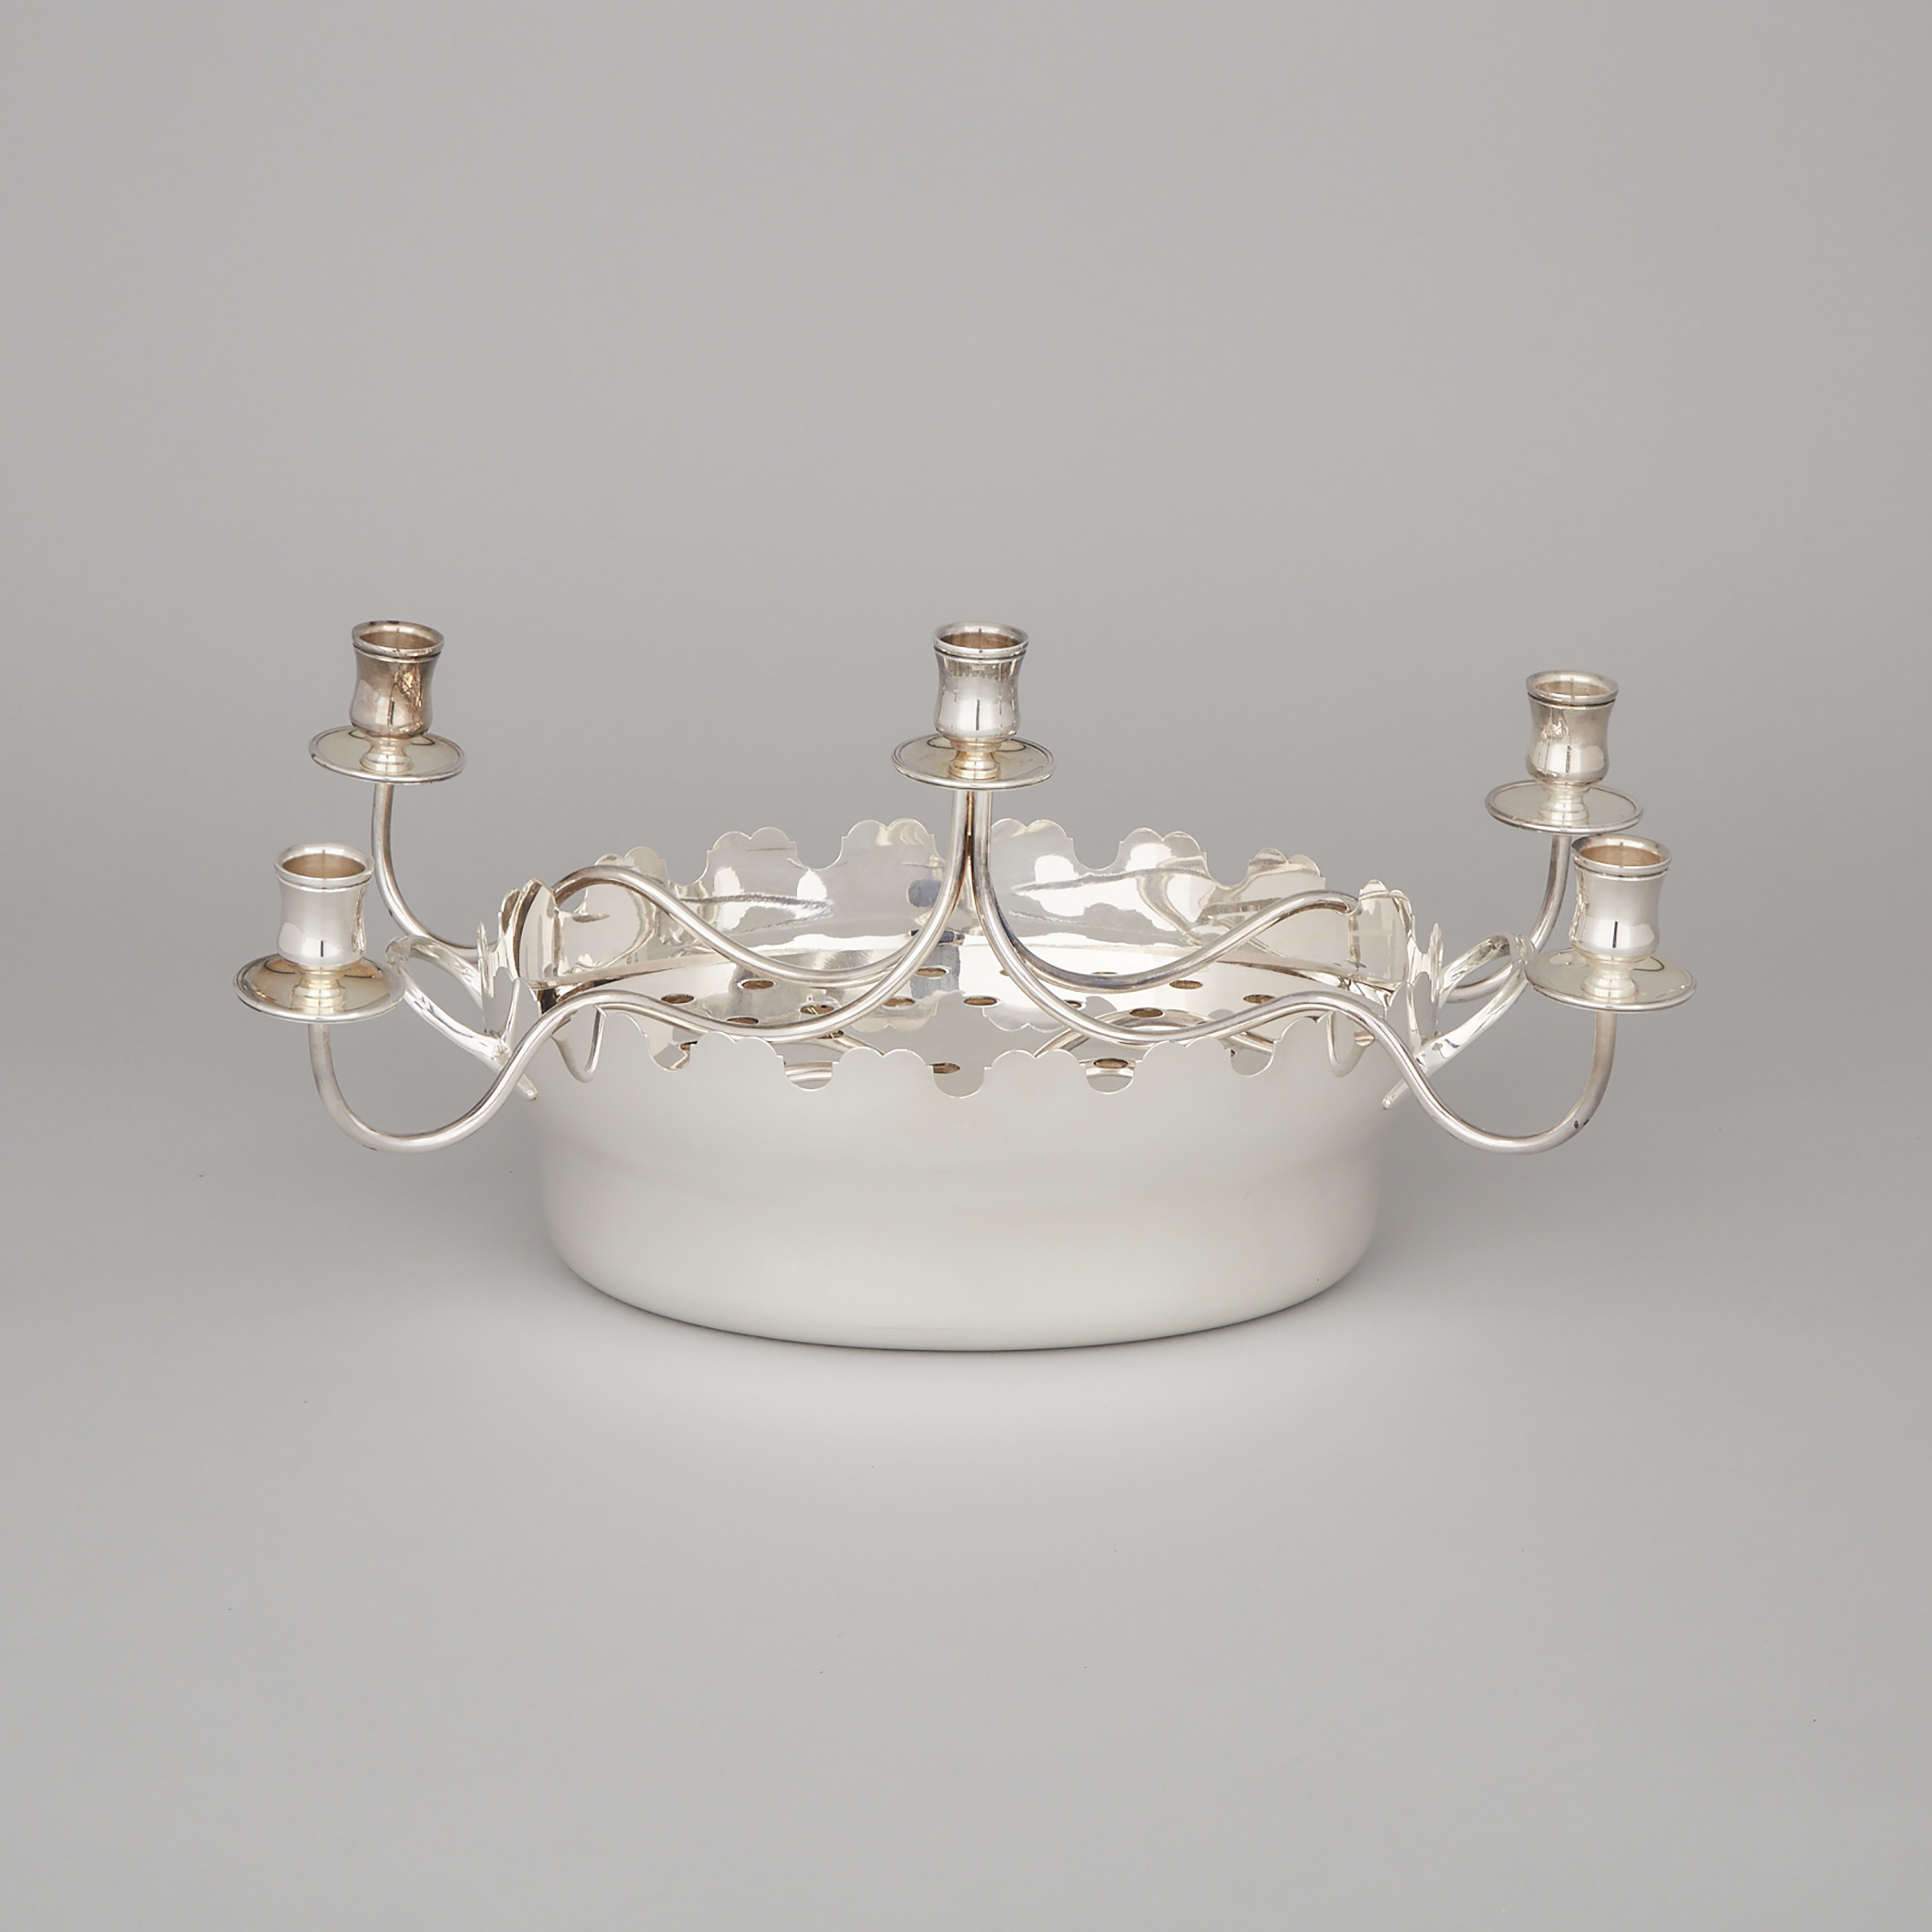 French Silver Plated Centrepiece with Candelabra, 20th century